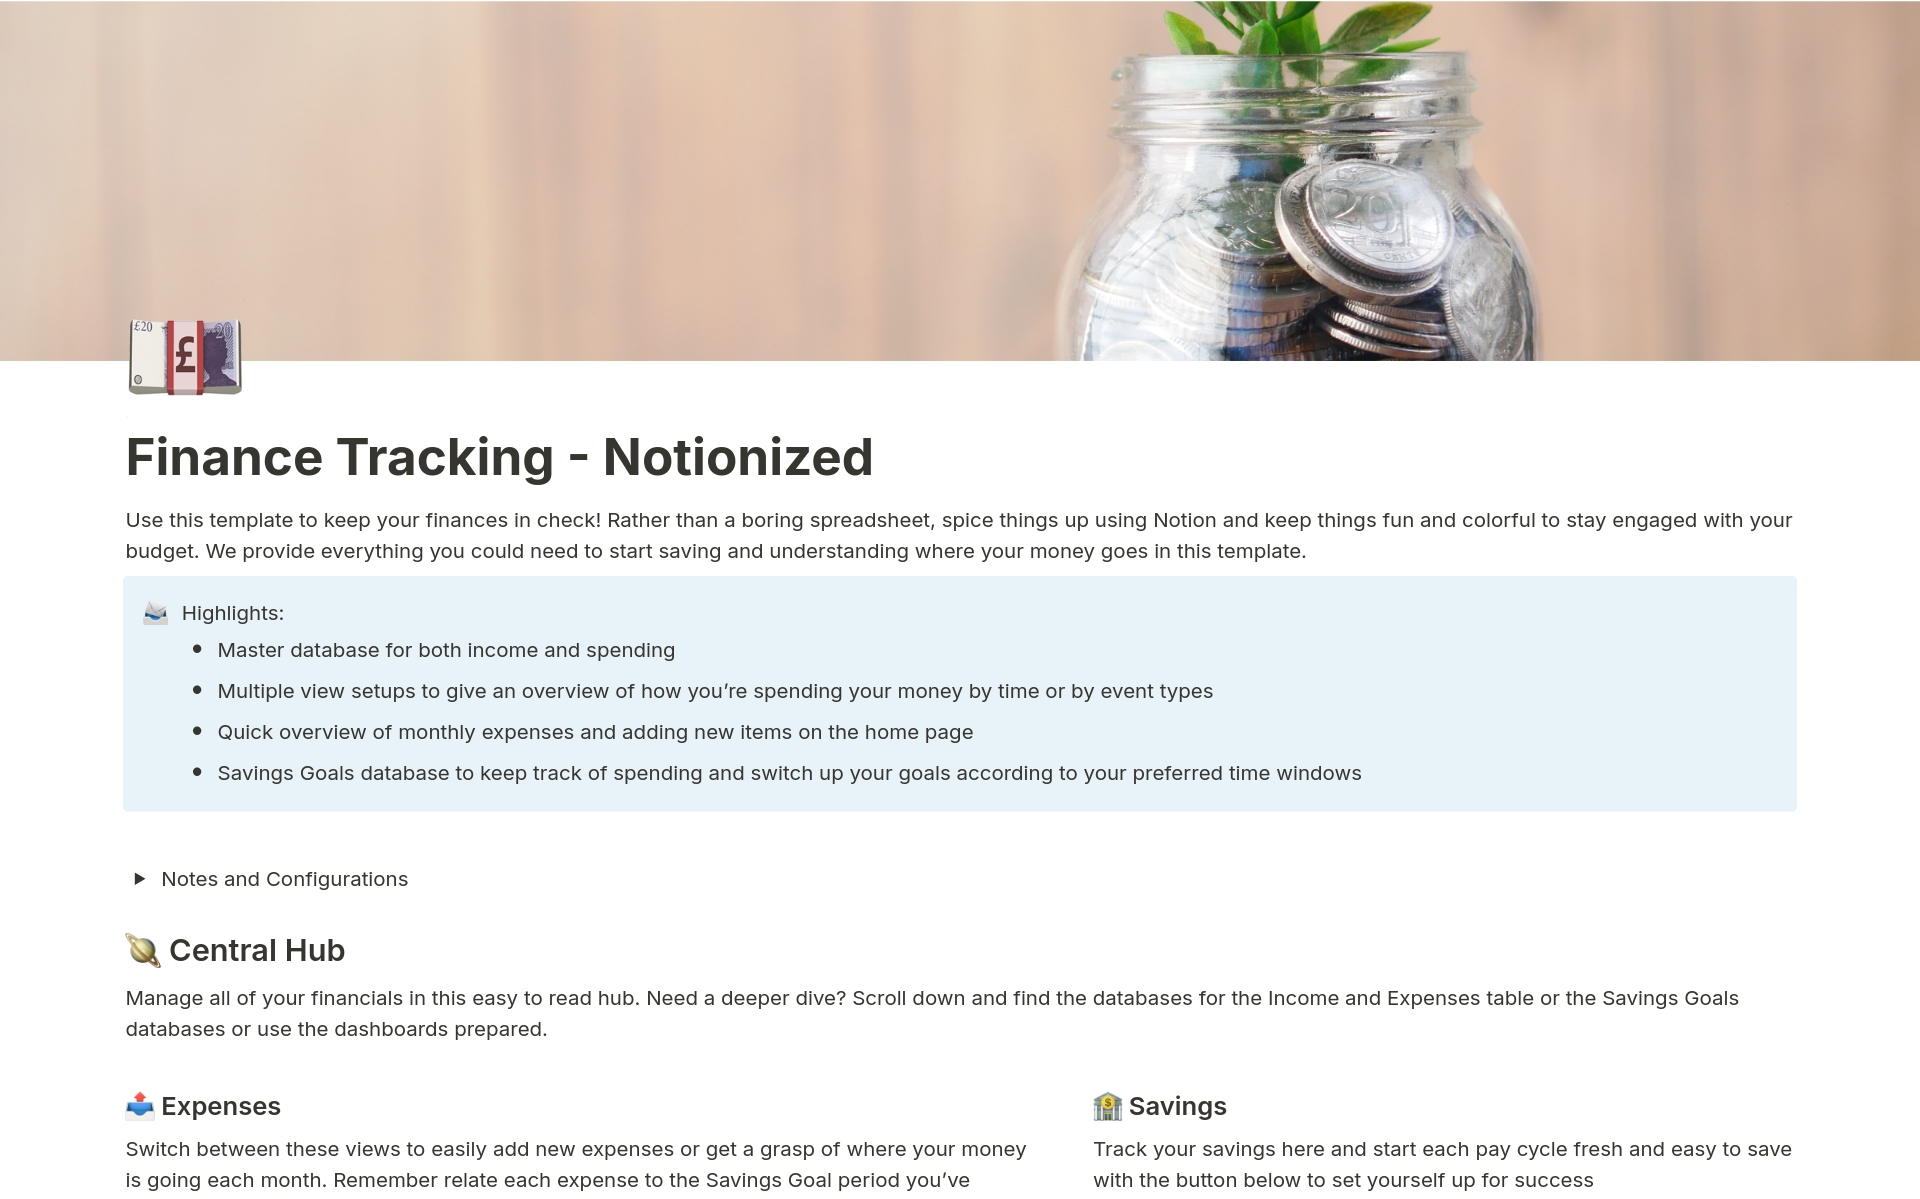 An advanced Notion template for personal finance tracking featuring savings automation, expense itemization and various database views for best visibility.